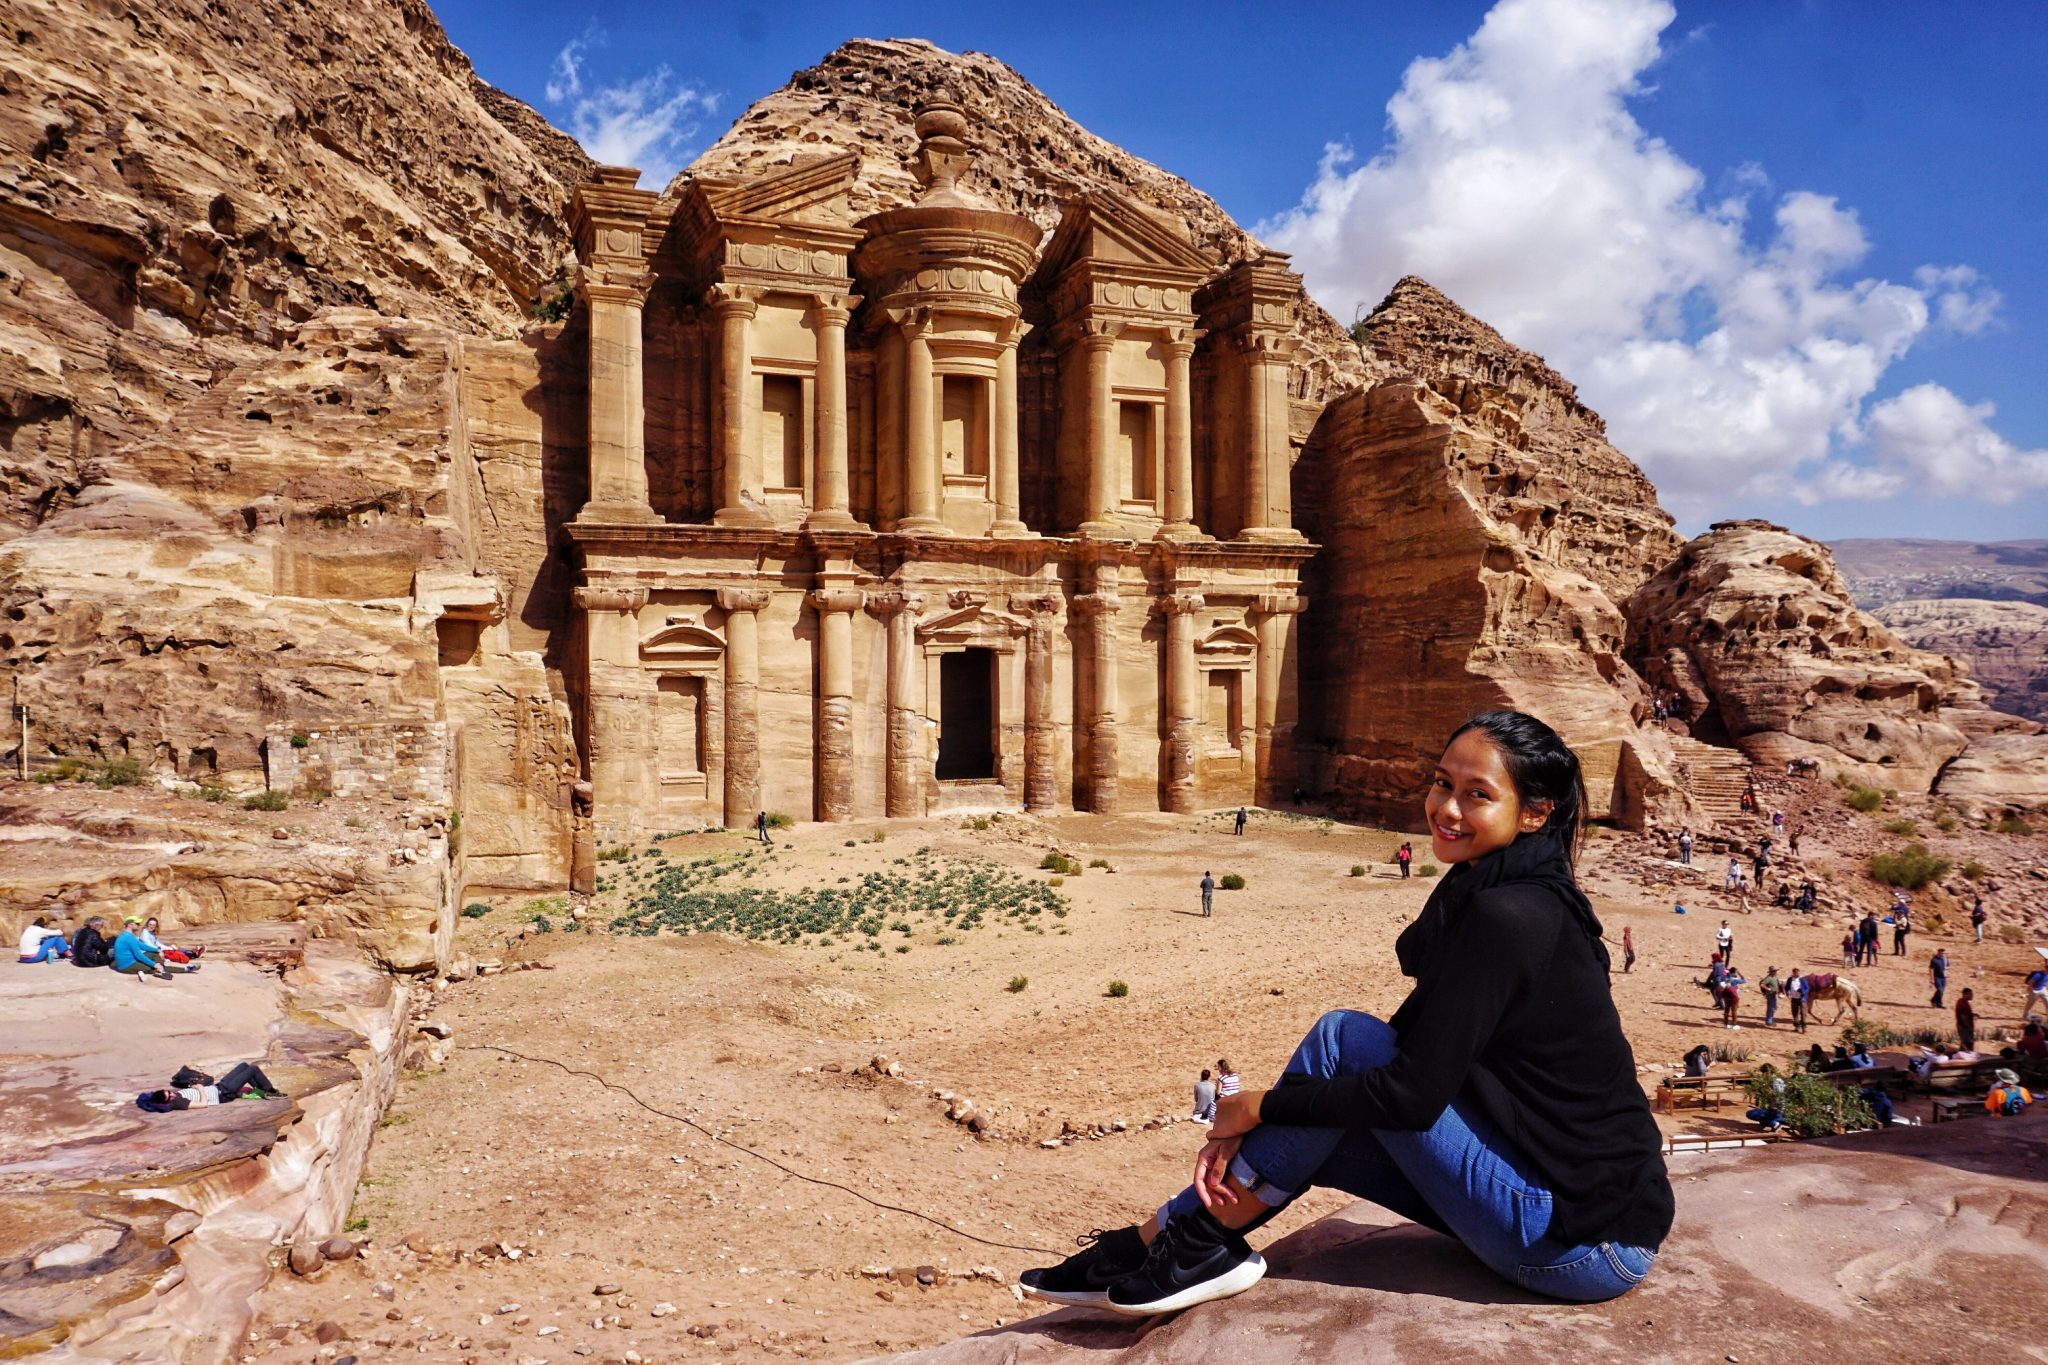 The Ultimate One Day Guide to Petra, Jordan